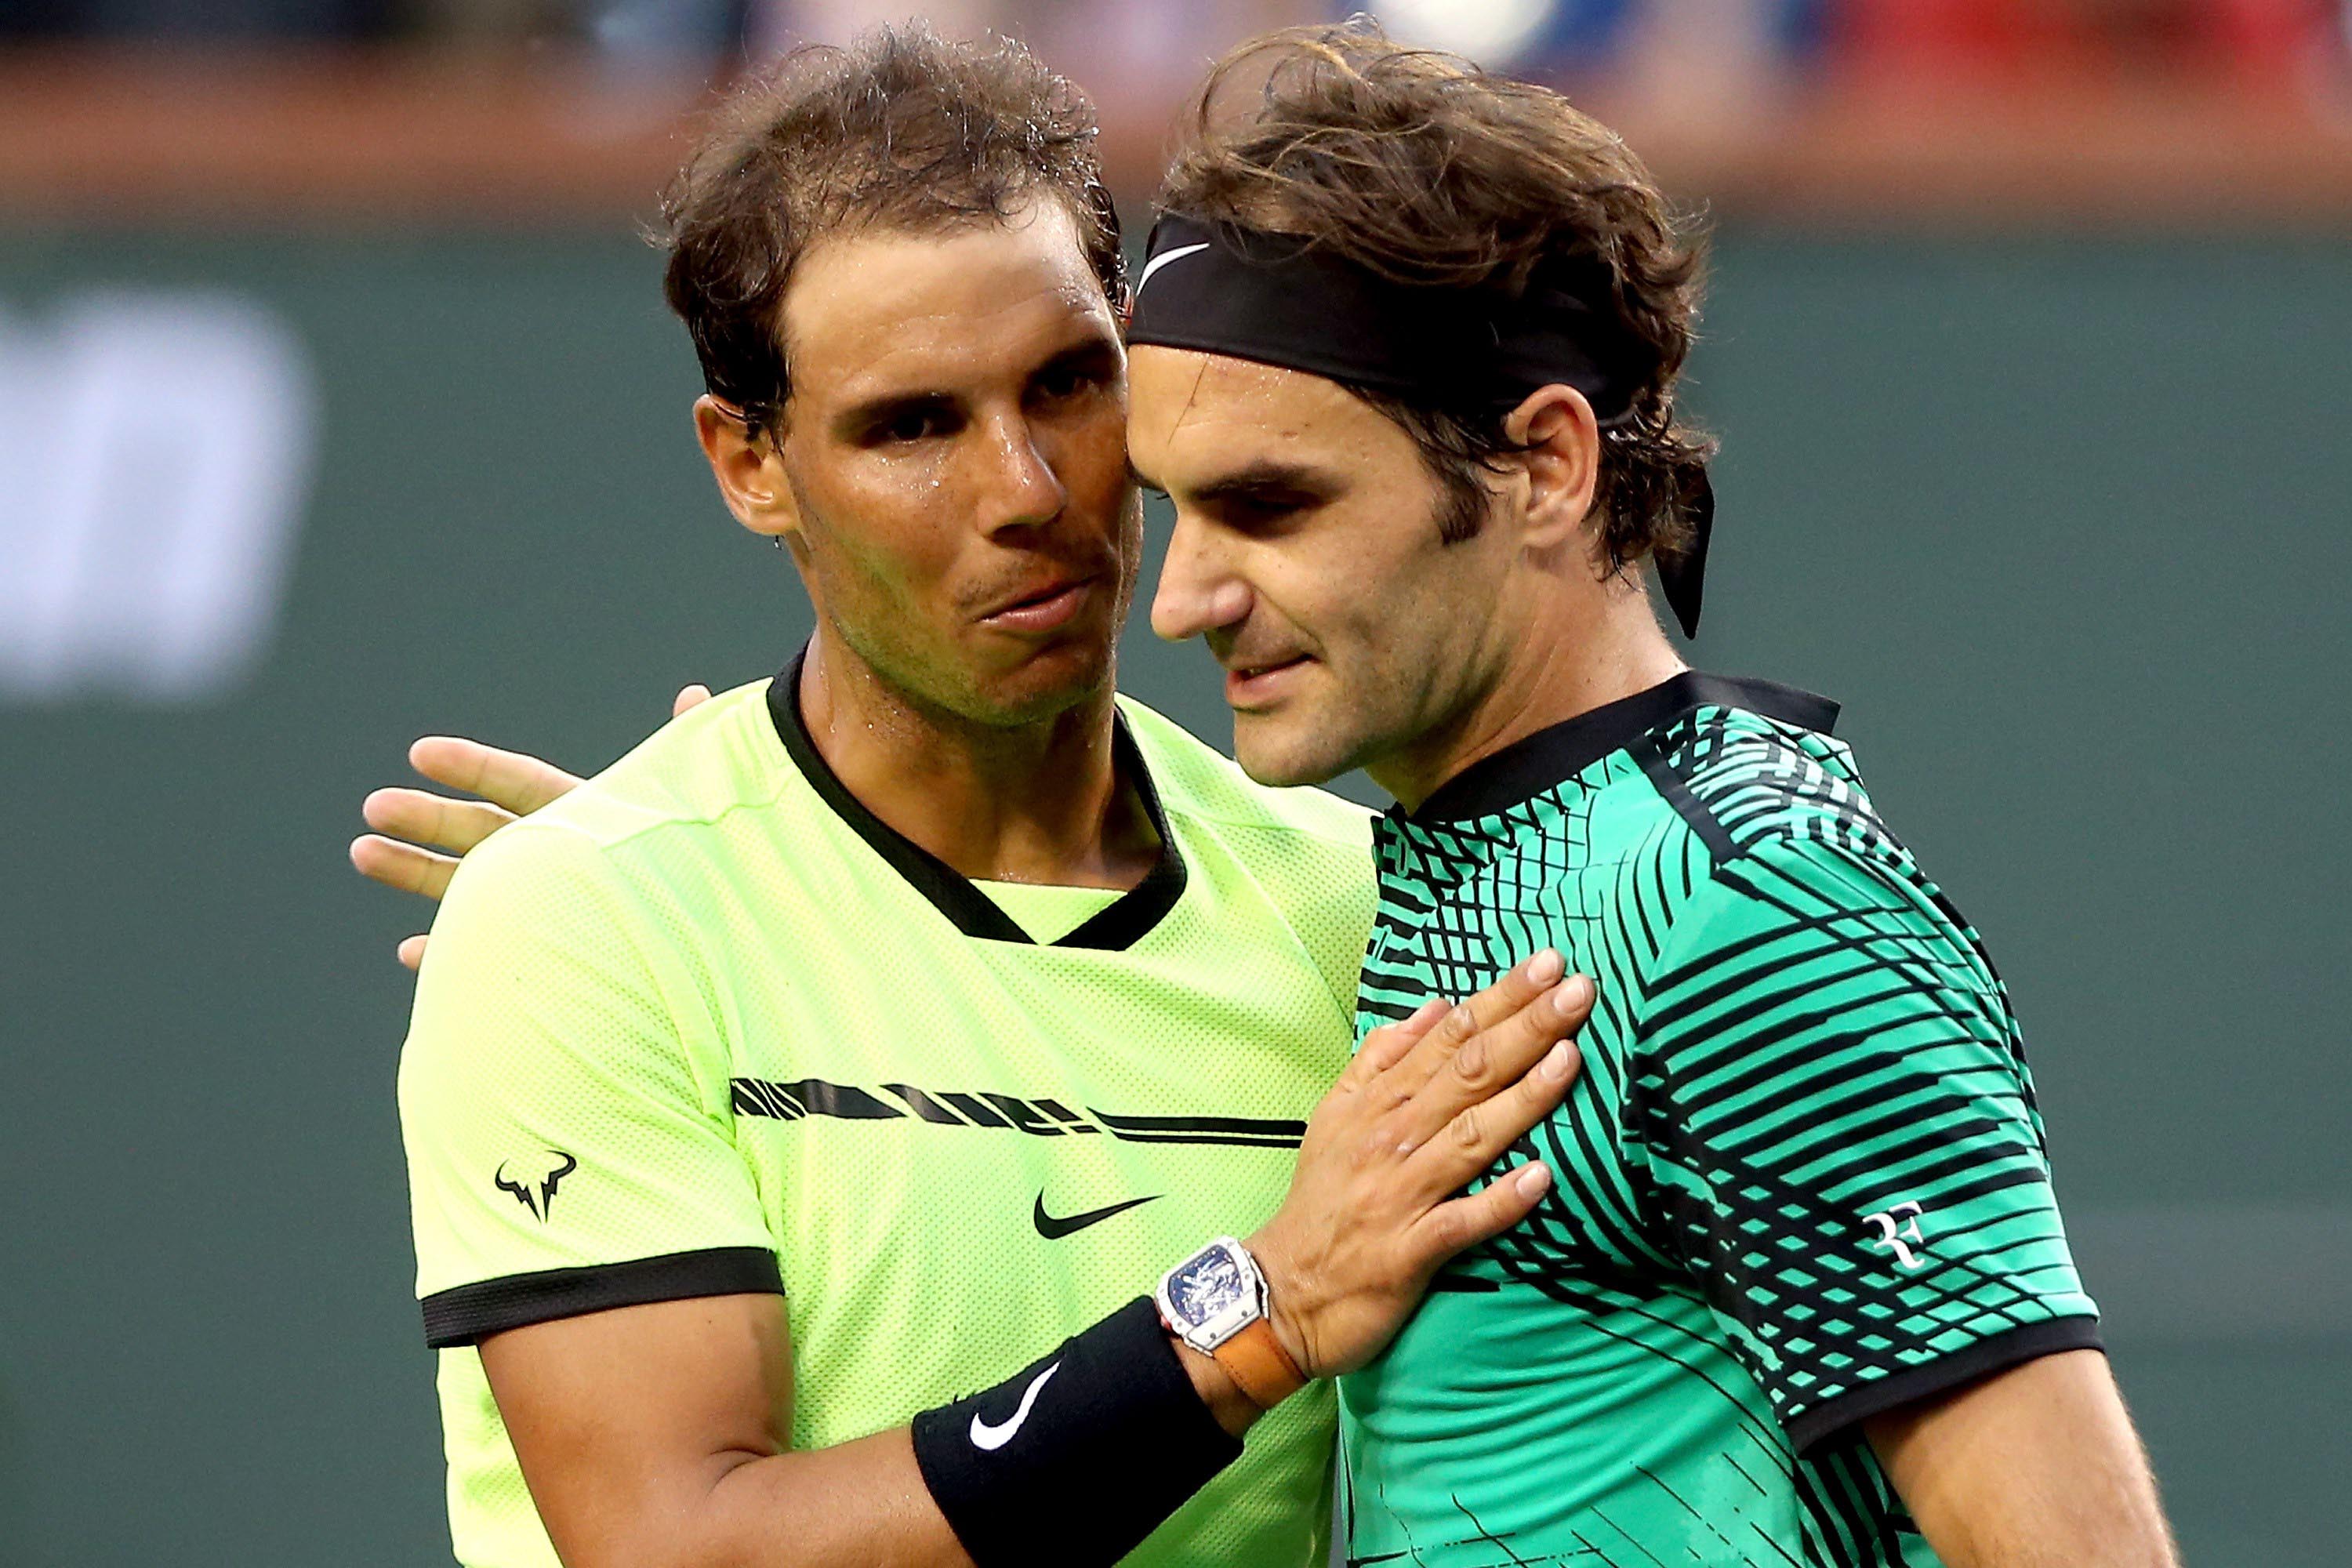 Roger Federer v/s Rafael Nadal Miami Open Final Live Streaming and where to watch in India